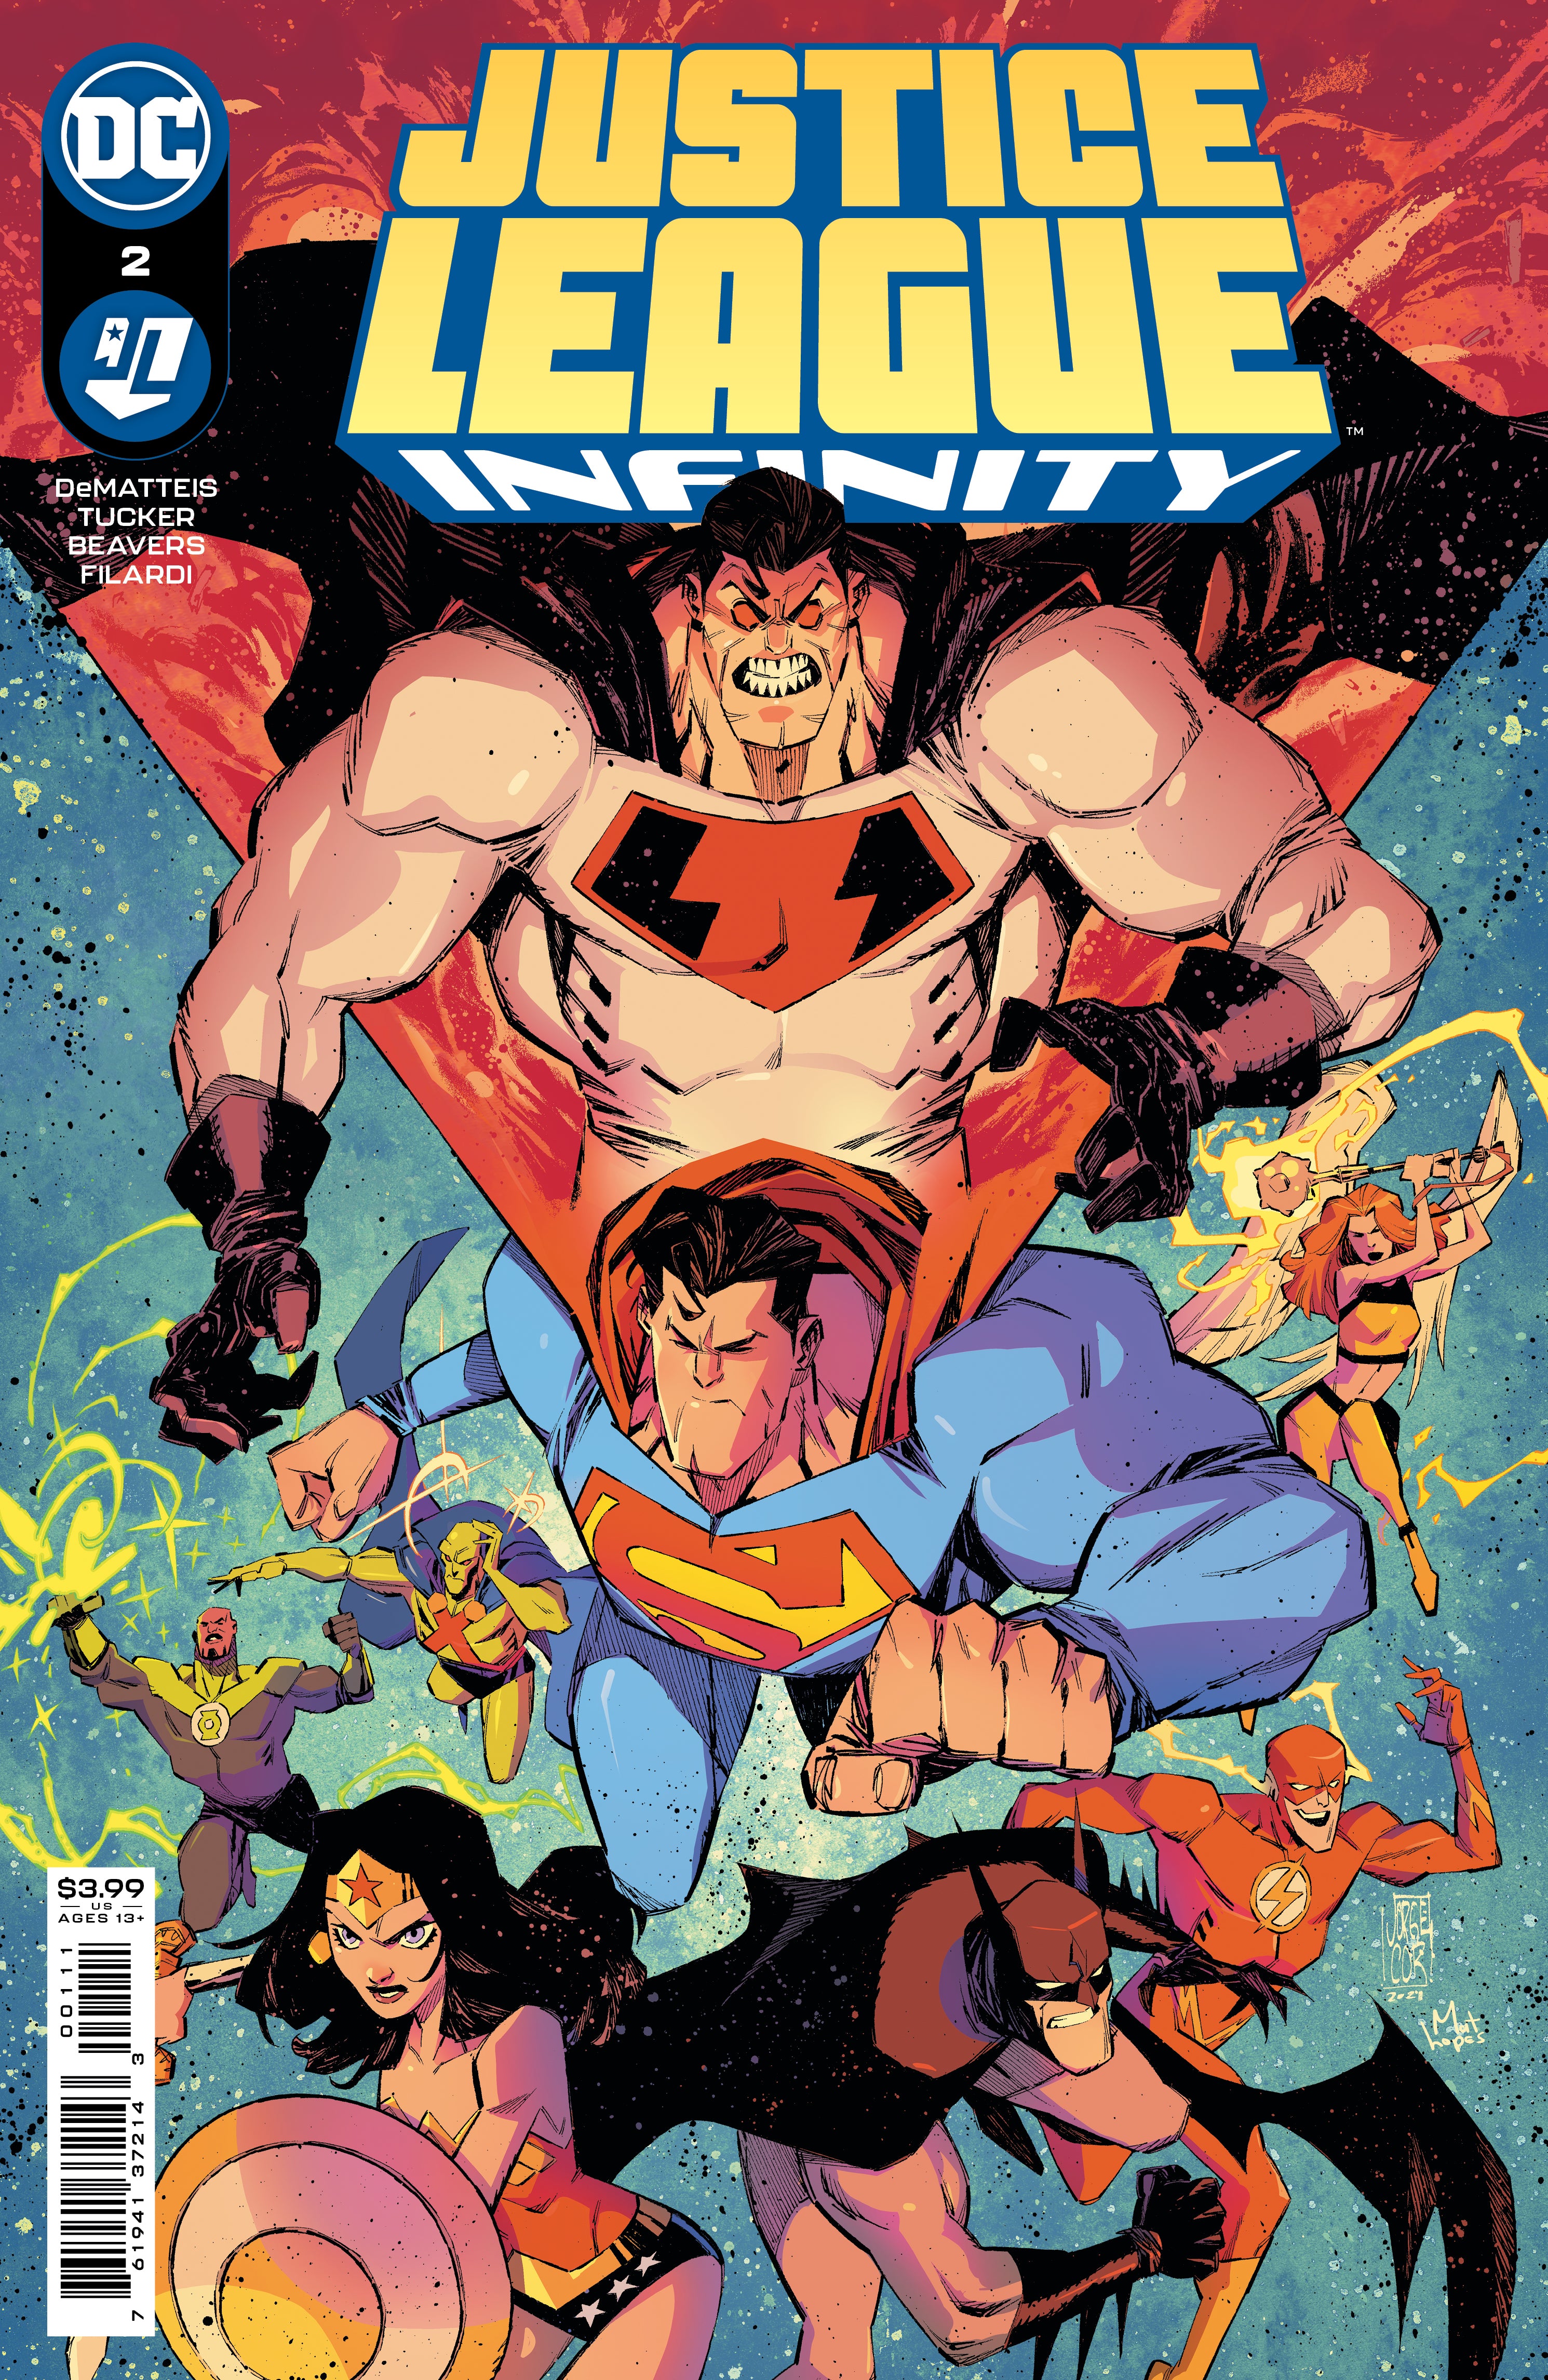 JUSTICE LEAGUE INFINITY #2 (OF 7)